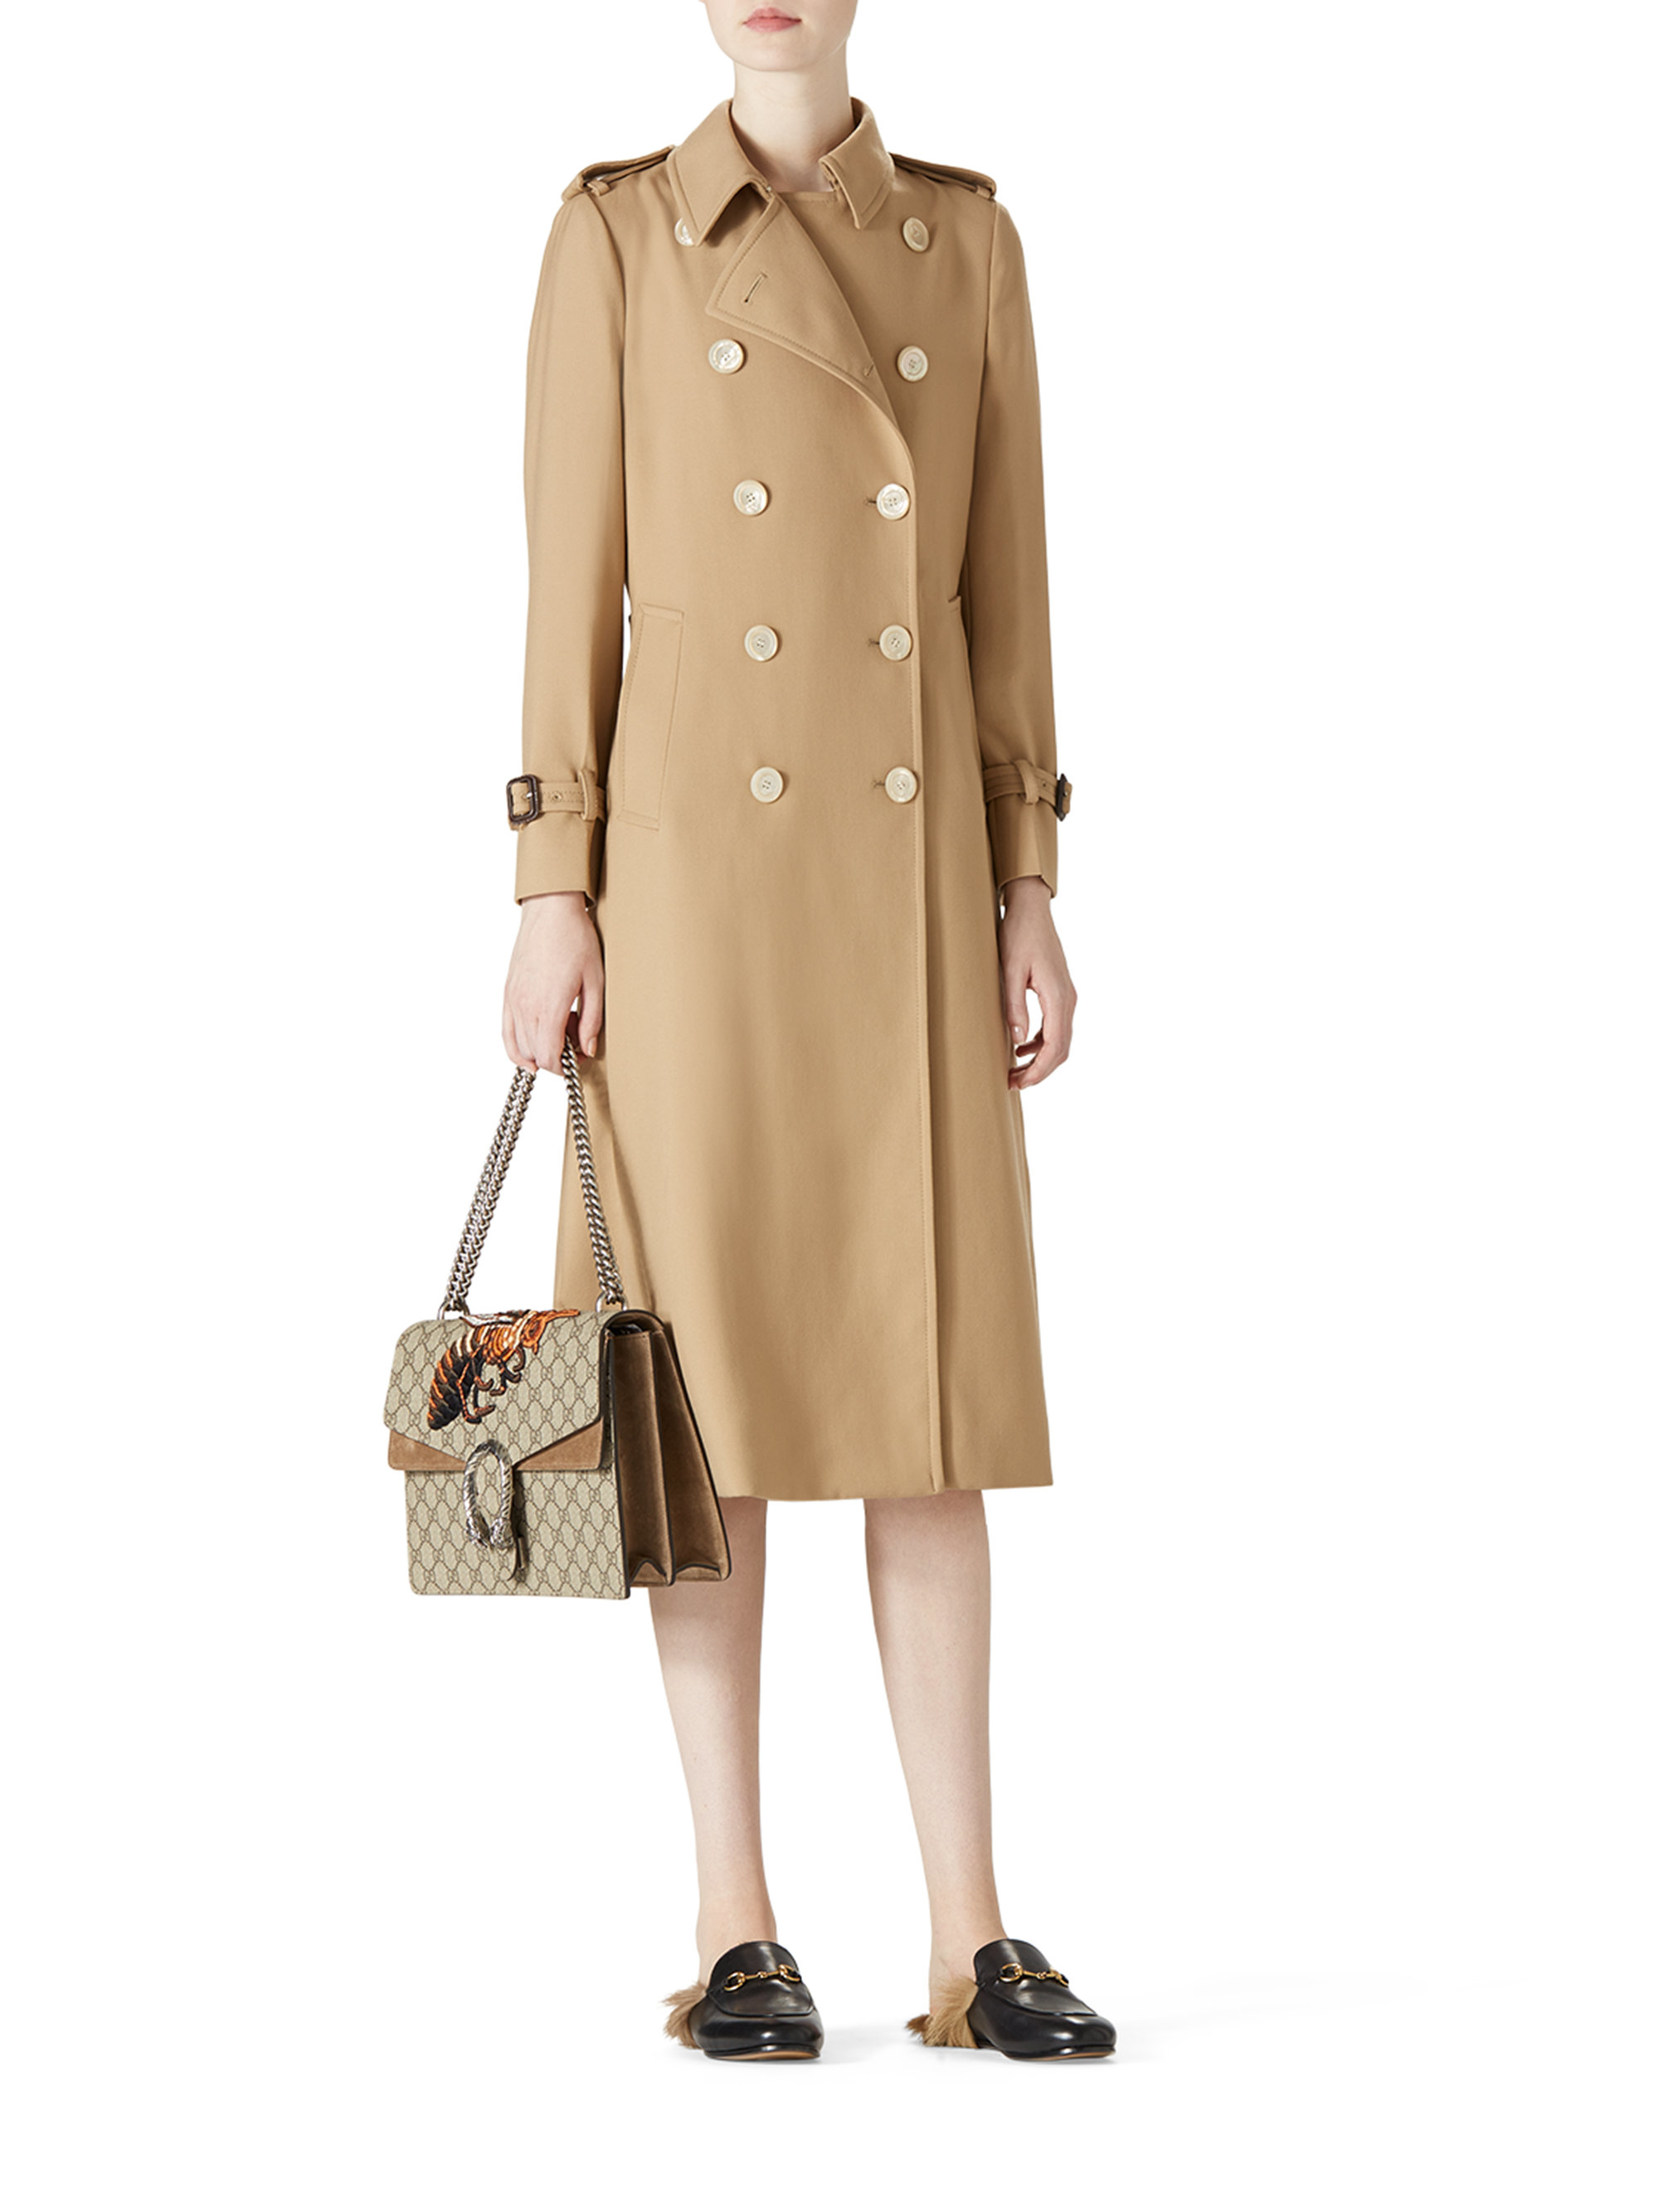 Lyst - Gucci Wool Trench Coat in Brown